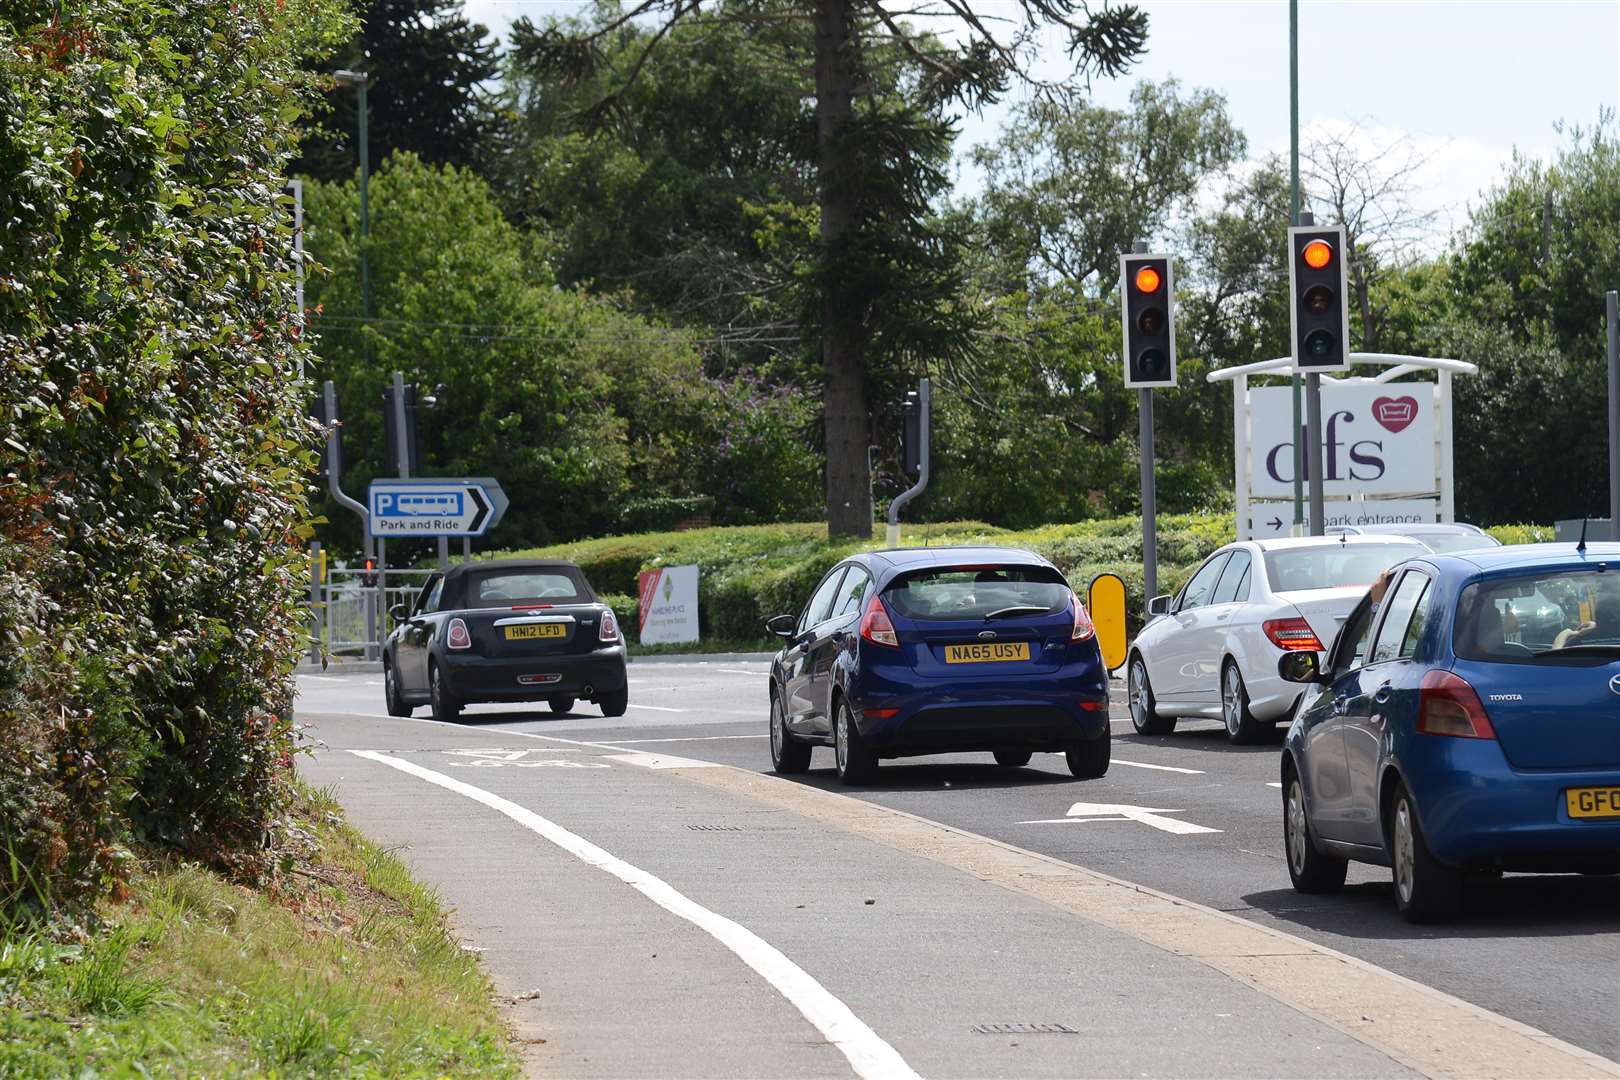 Initially motorists approaching the junction from Larkfield see only the traffic light controlling the turn-right lane